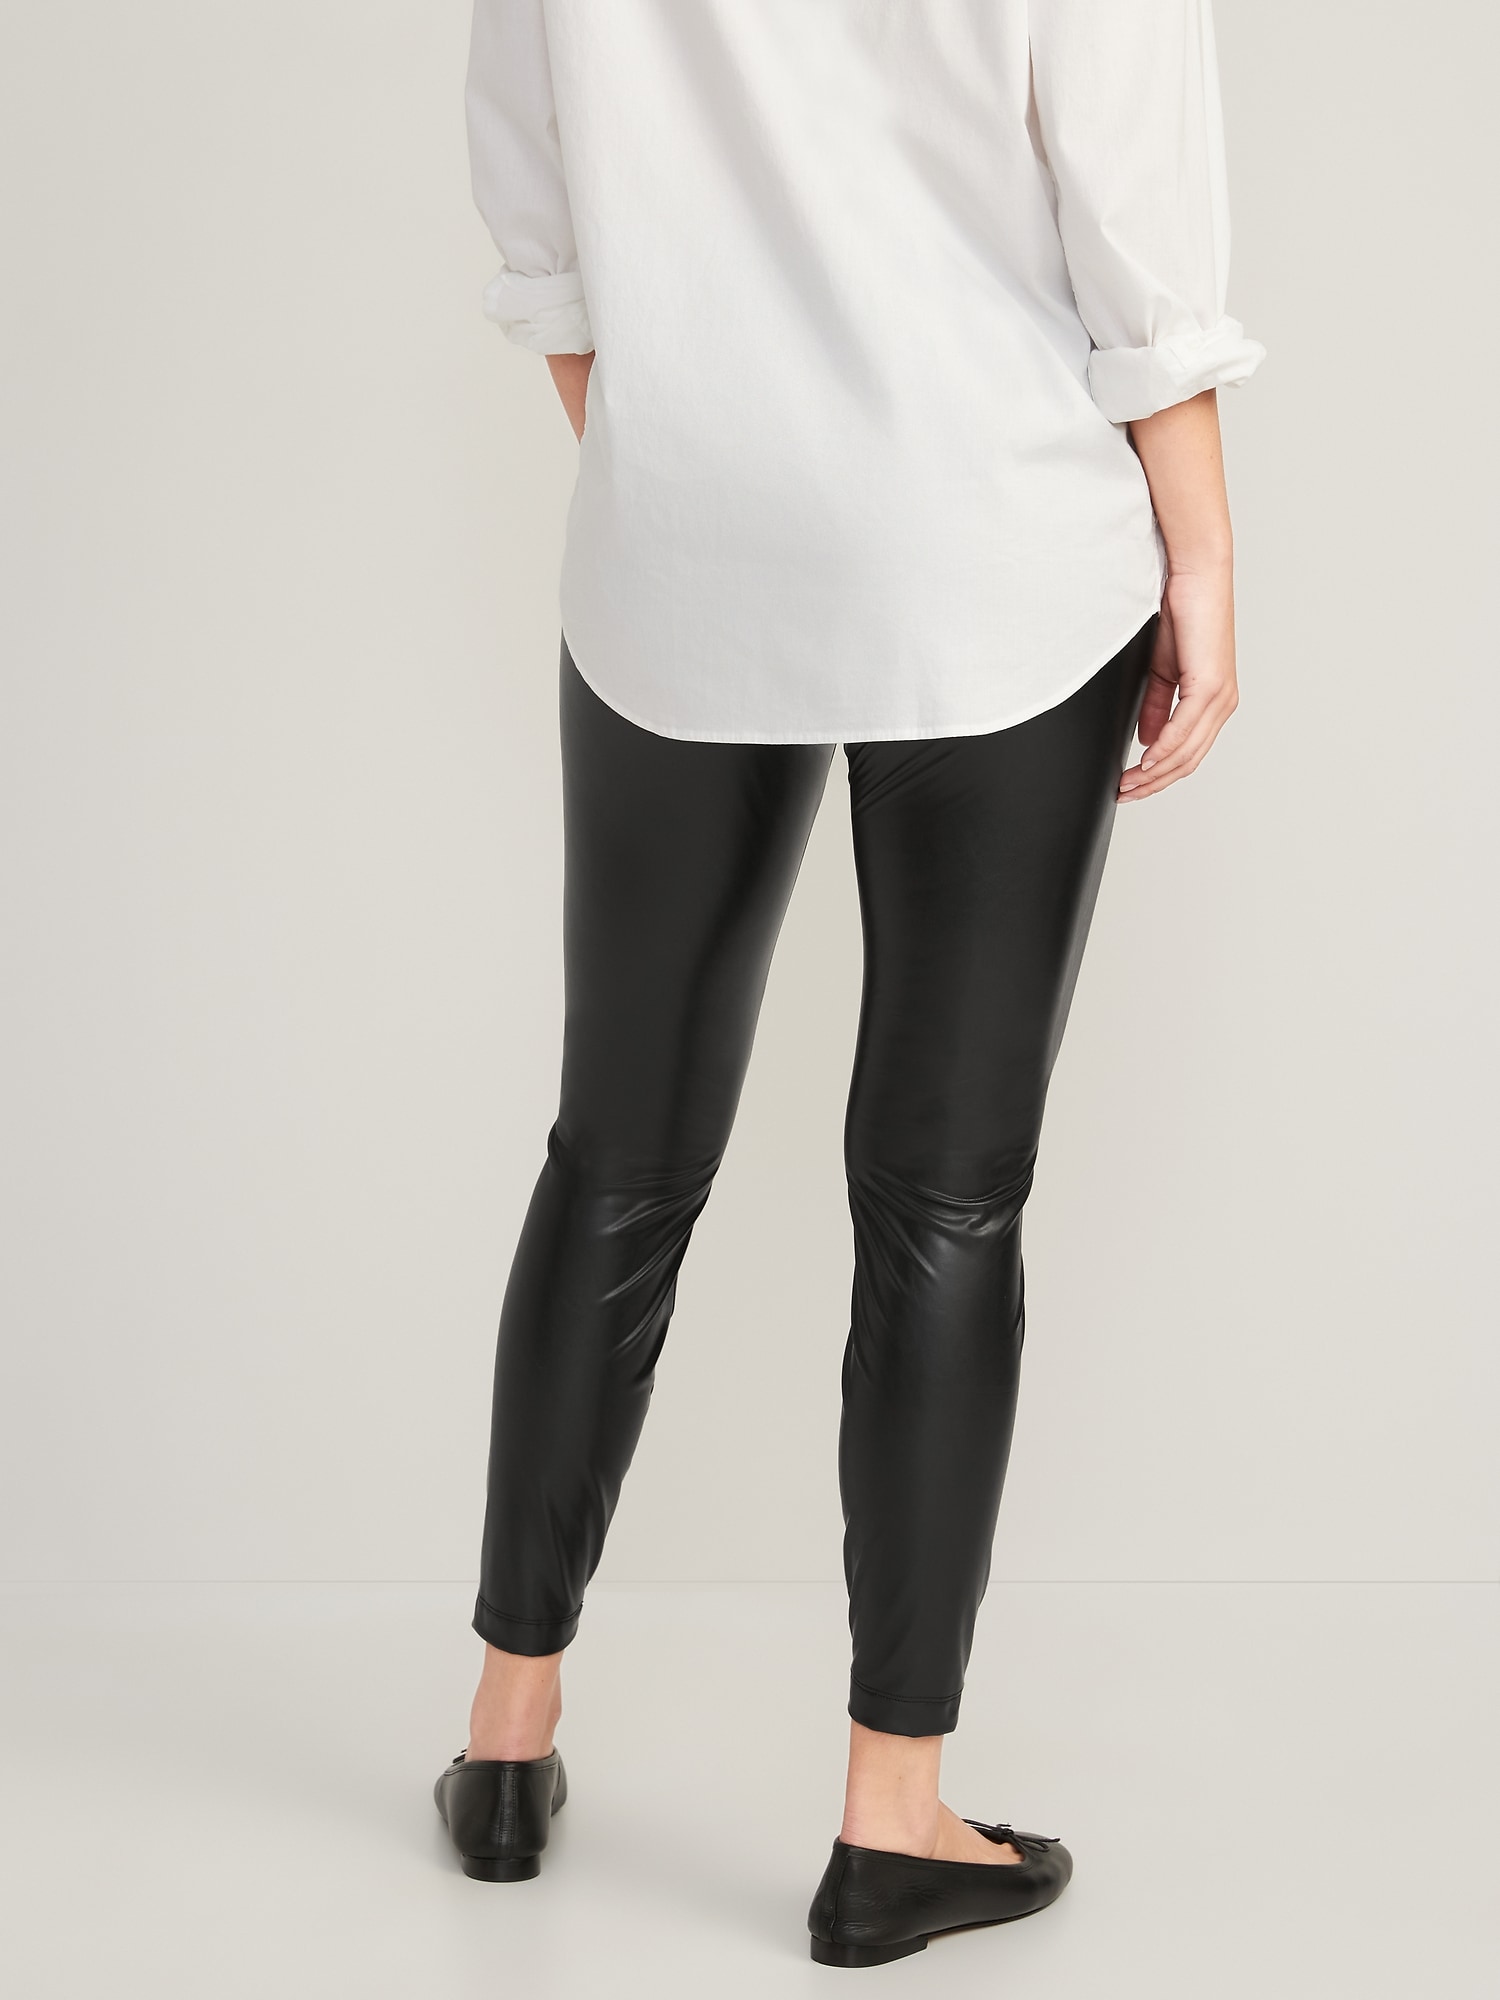 High-Waisted Faux Leather Leggings for Women